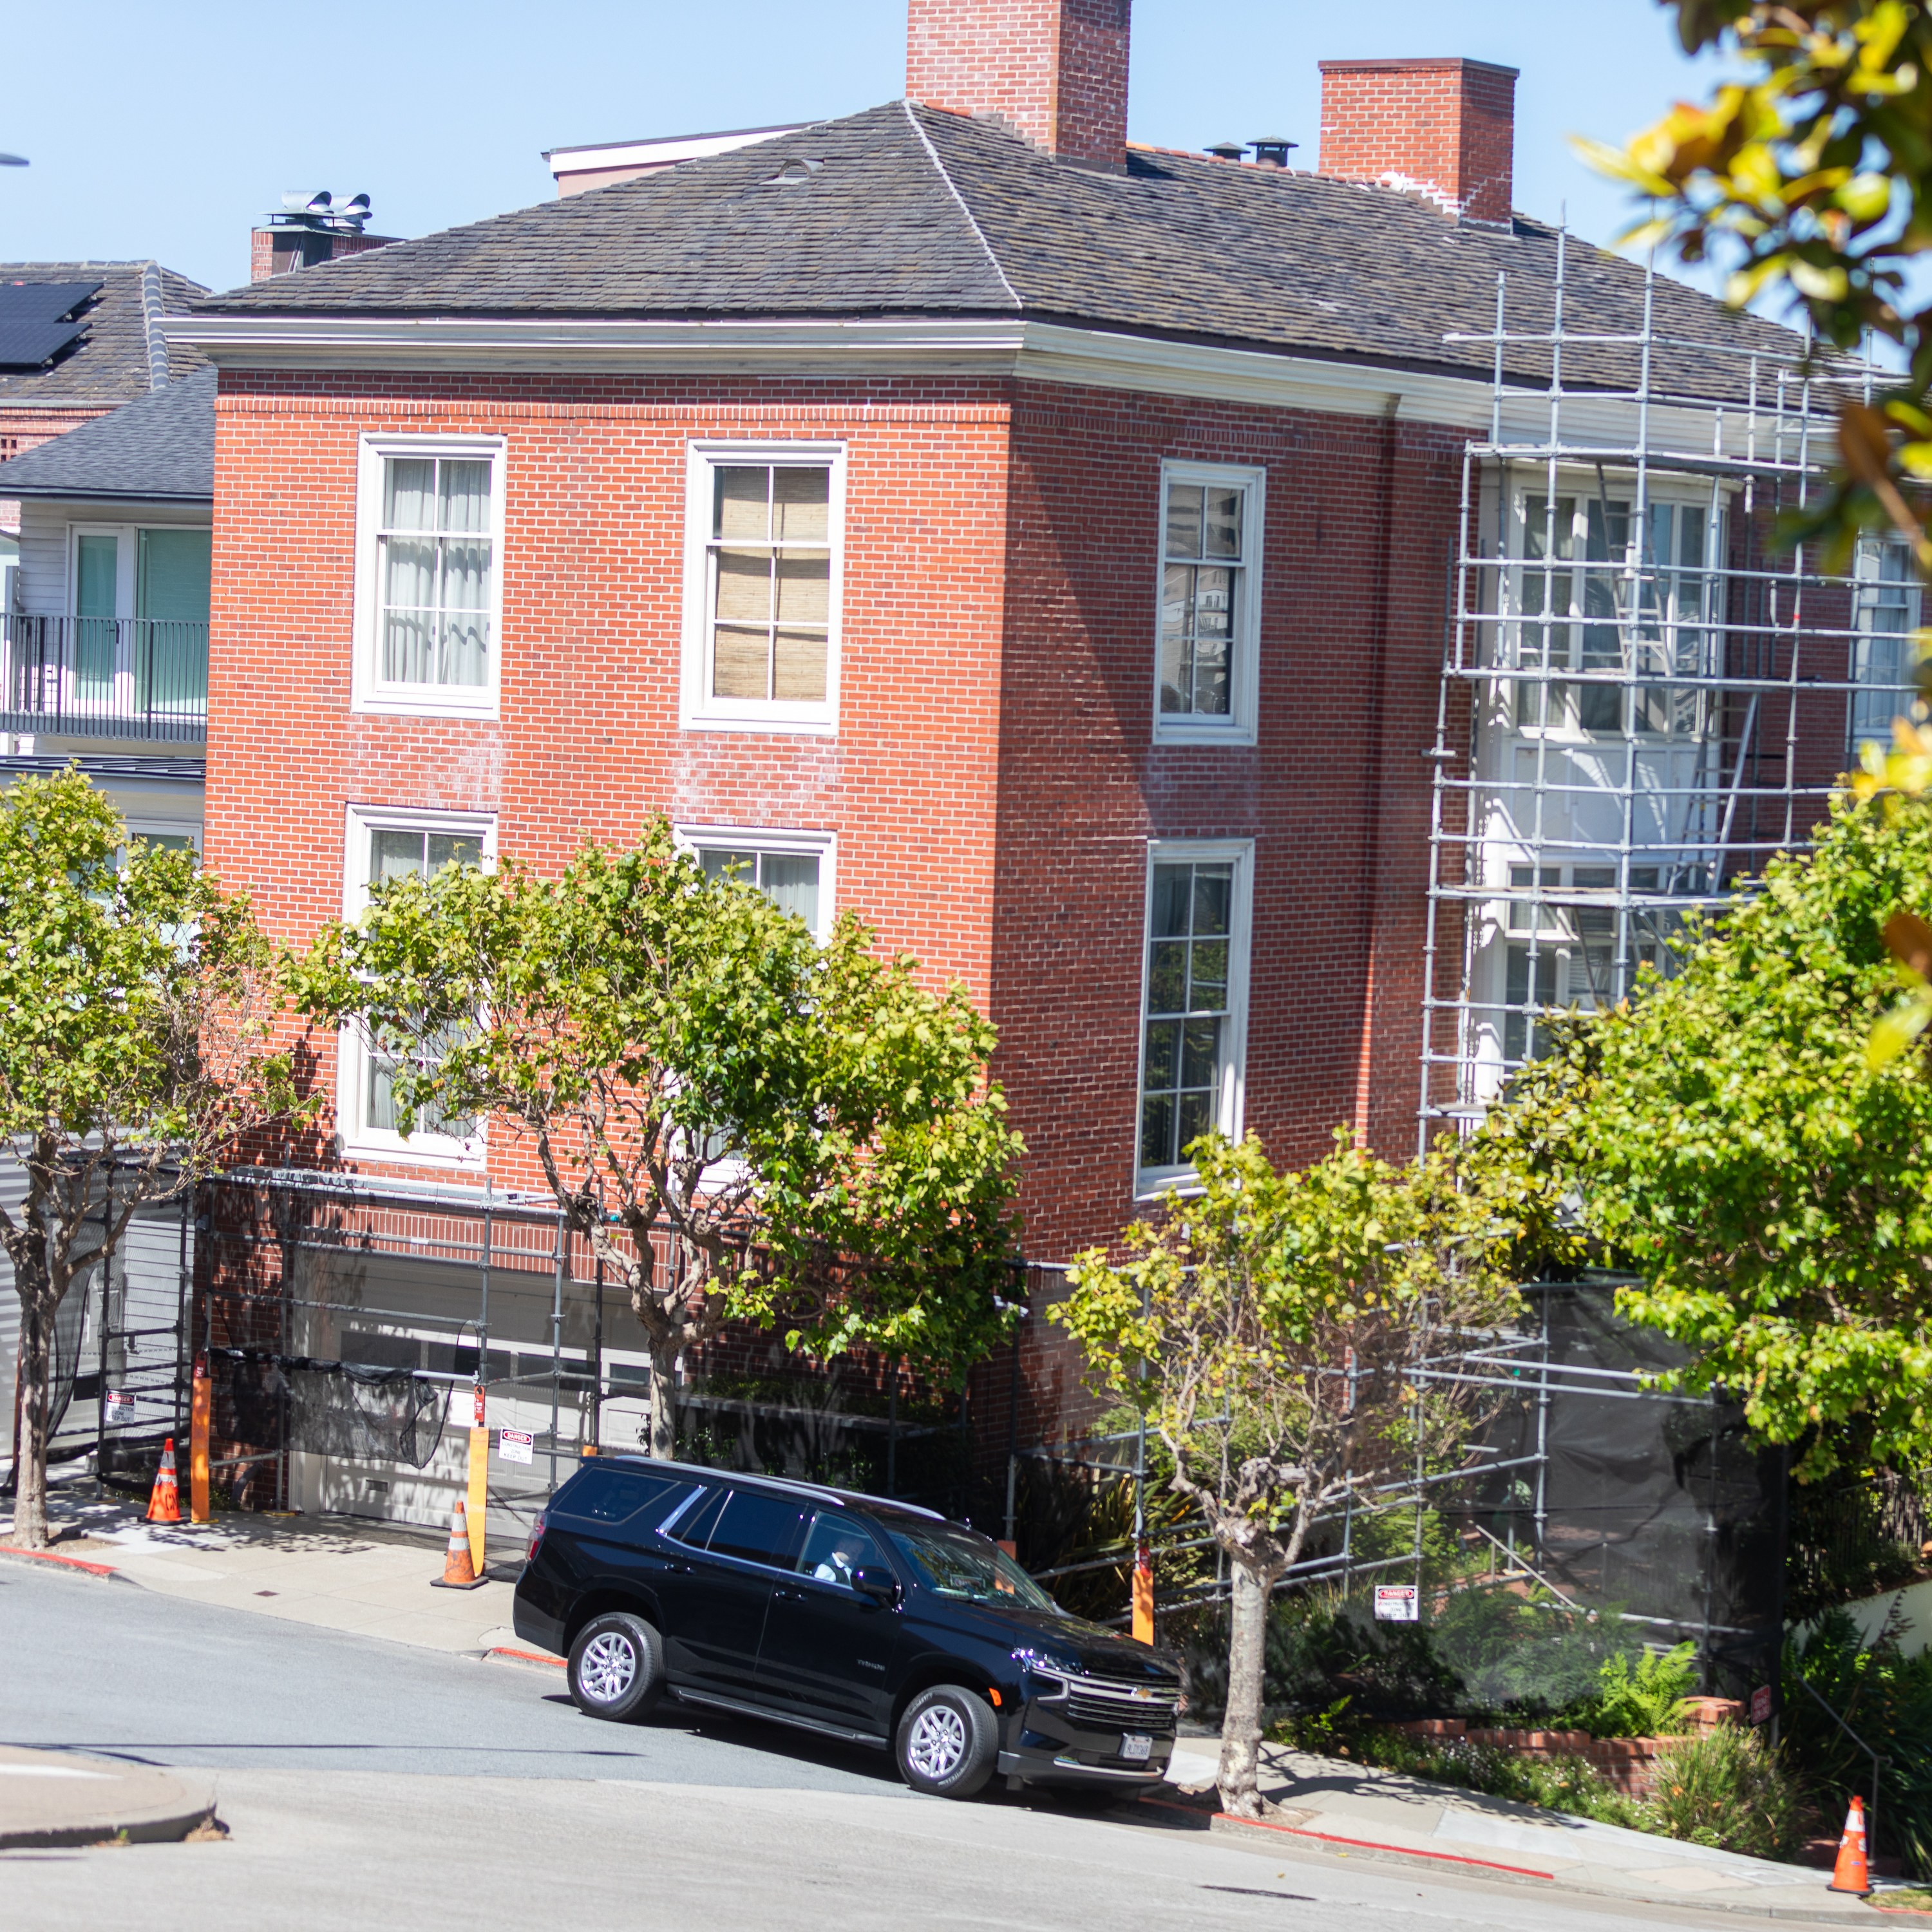 A red-brick building is undergoing maintenance with scaffolding on its side, surrounded by leafy trees and a black SUV parked in front.